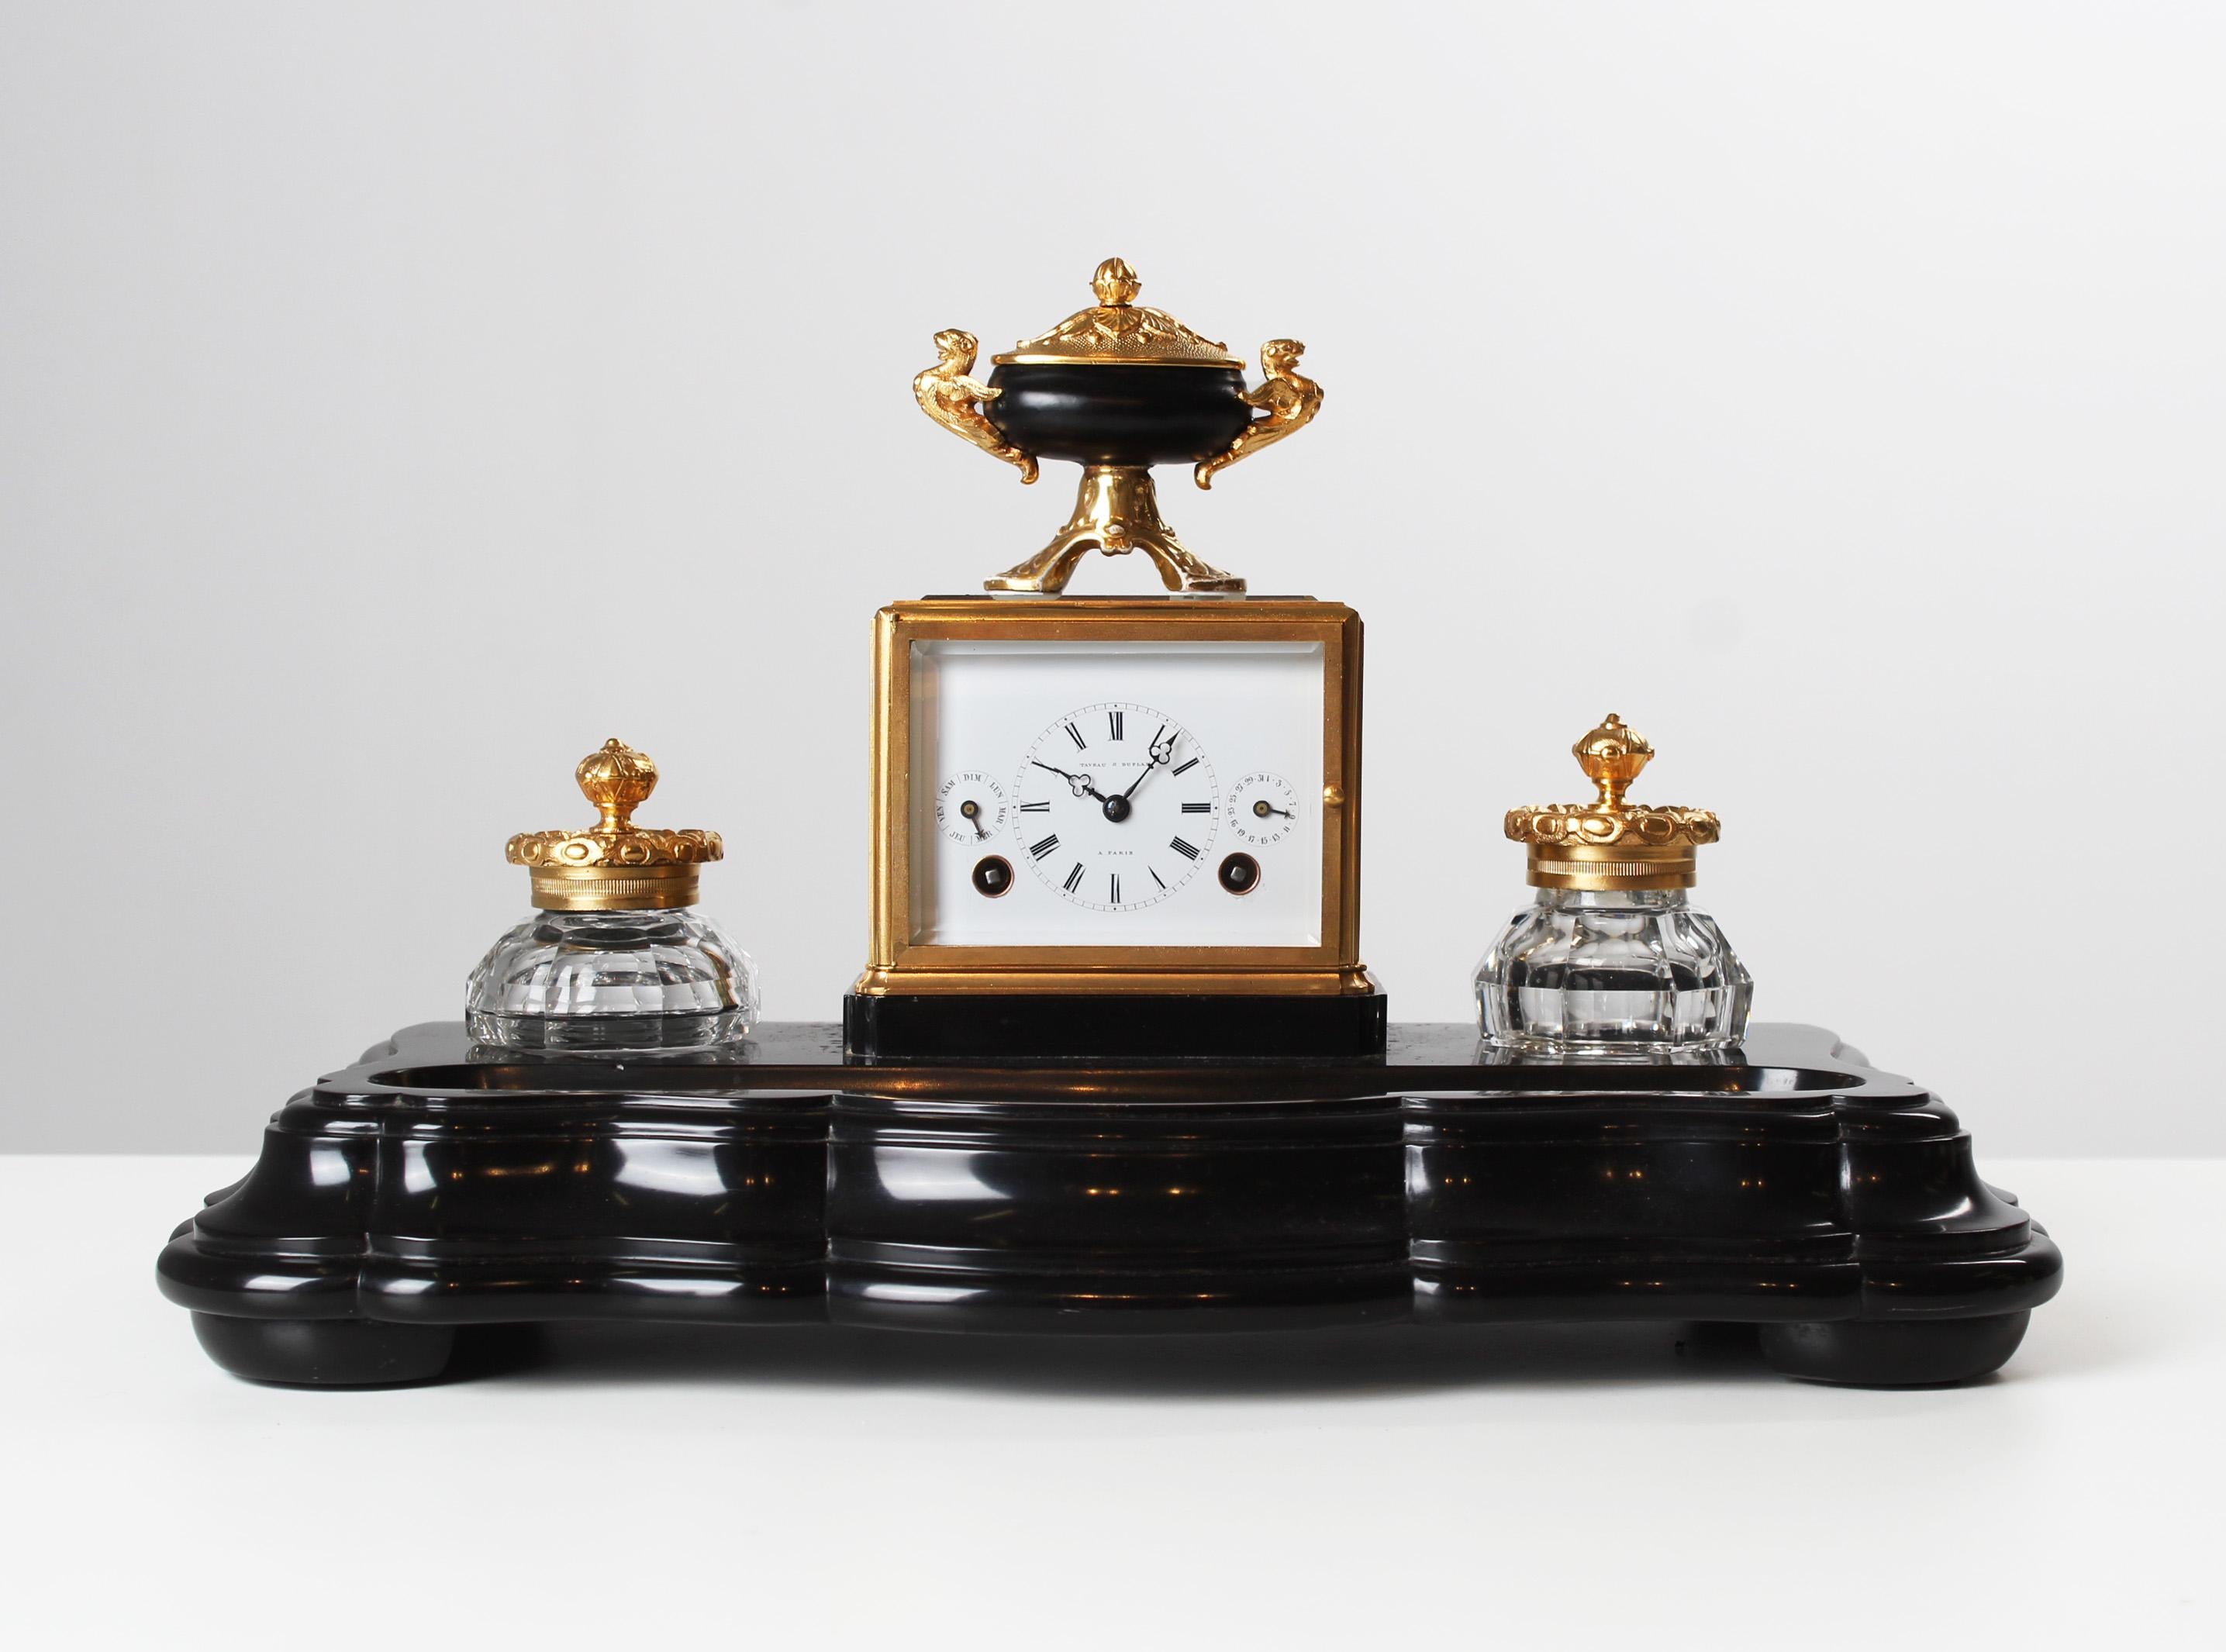 Antique writing set with inkwell and travel clock.
Paris
Brass, marble
Around 1850

Dimensions: H x W x D: 23 x 39 x 20 cm

Description:
Very rare to find antique desk set with pendulette.

Marble base standing on round feet. In the front